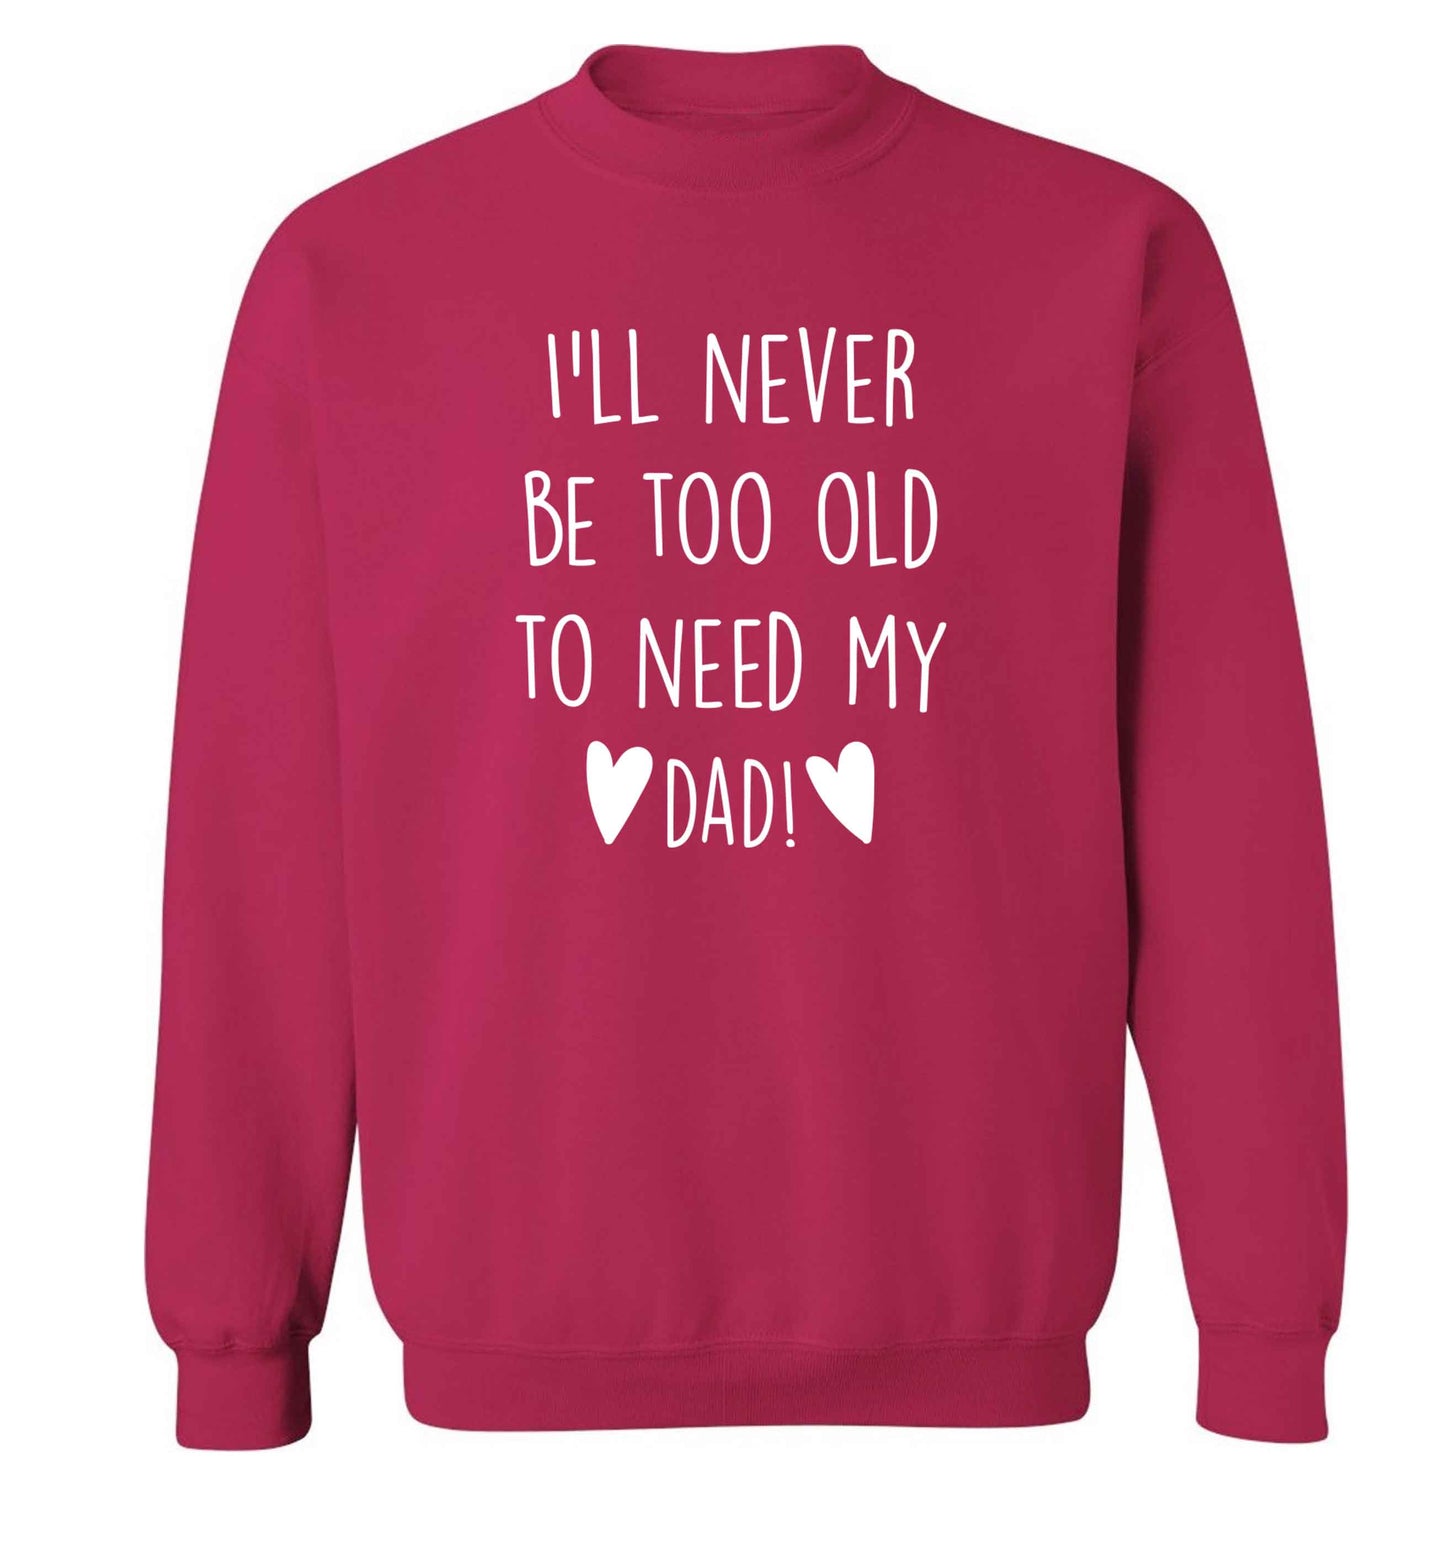 I'll never be too old to need my dad adult's unisex pink sweater 2XL